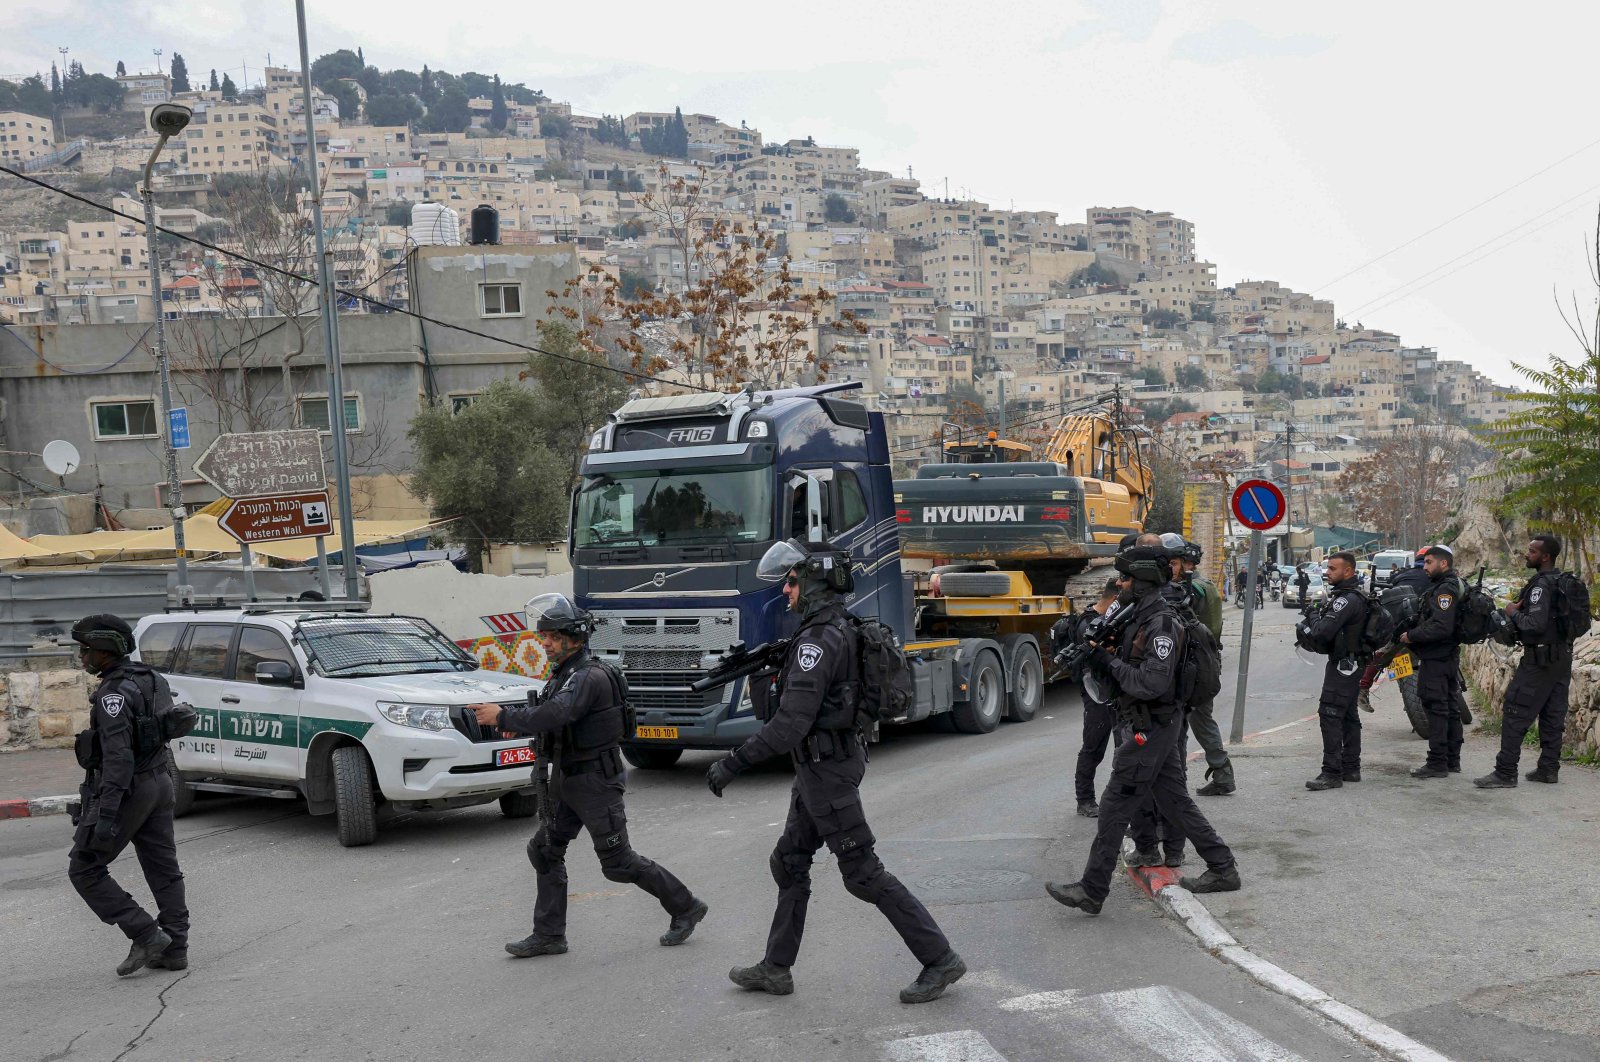 Israeli border police patrol as Jerusalem municipality workers prepare to demolish a house belonging to a Palestinian family, which Israeli authorities say was built without a permit, in the neighborhood of Silwan, East Jerusalem, occupied Palestine, on Dec. 29, 2021. (AFP Photo)